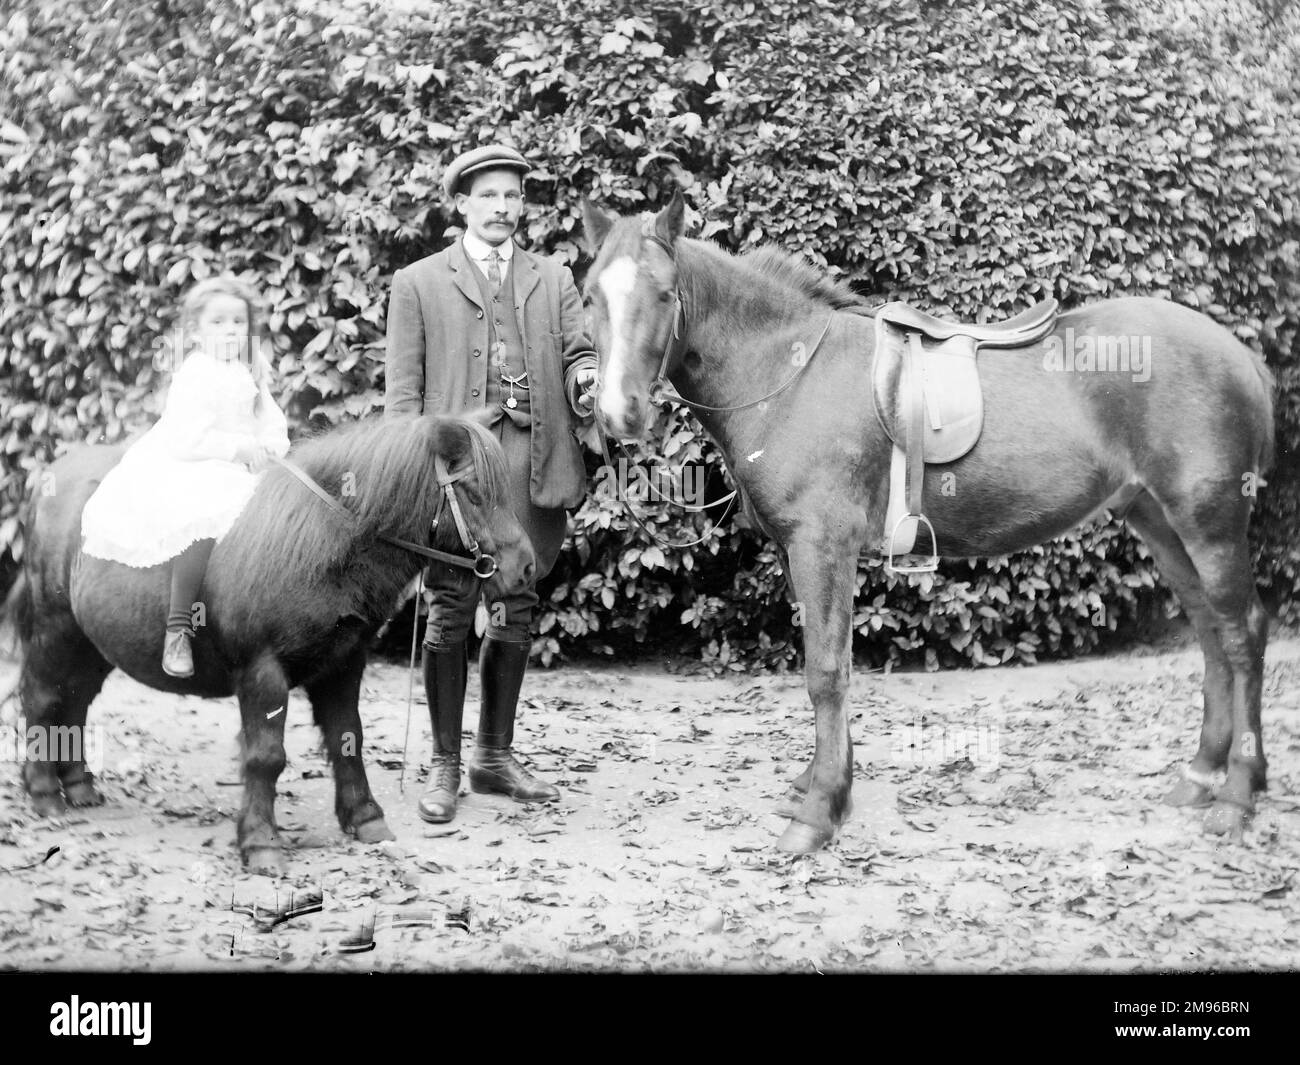 A father and daughter in a garden, probably somewhere in Mid Wales.  He is standing next to a small horse, holding its bit, while she bravely sits on the back of a Shetland pony. Stock Photo